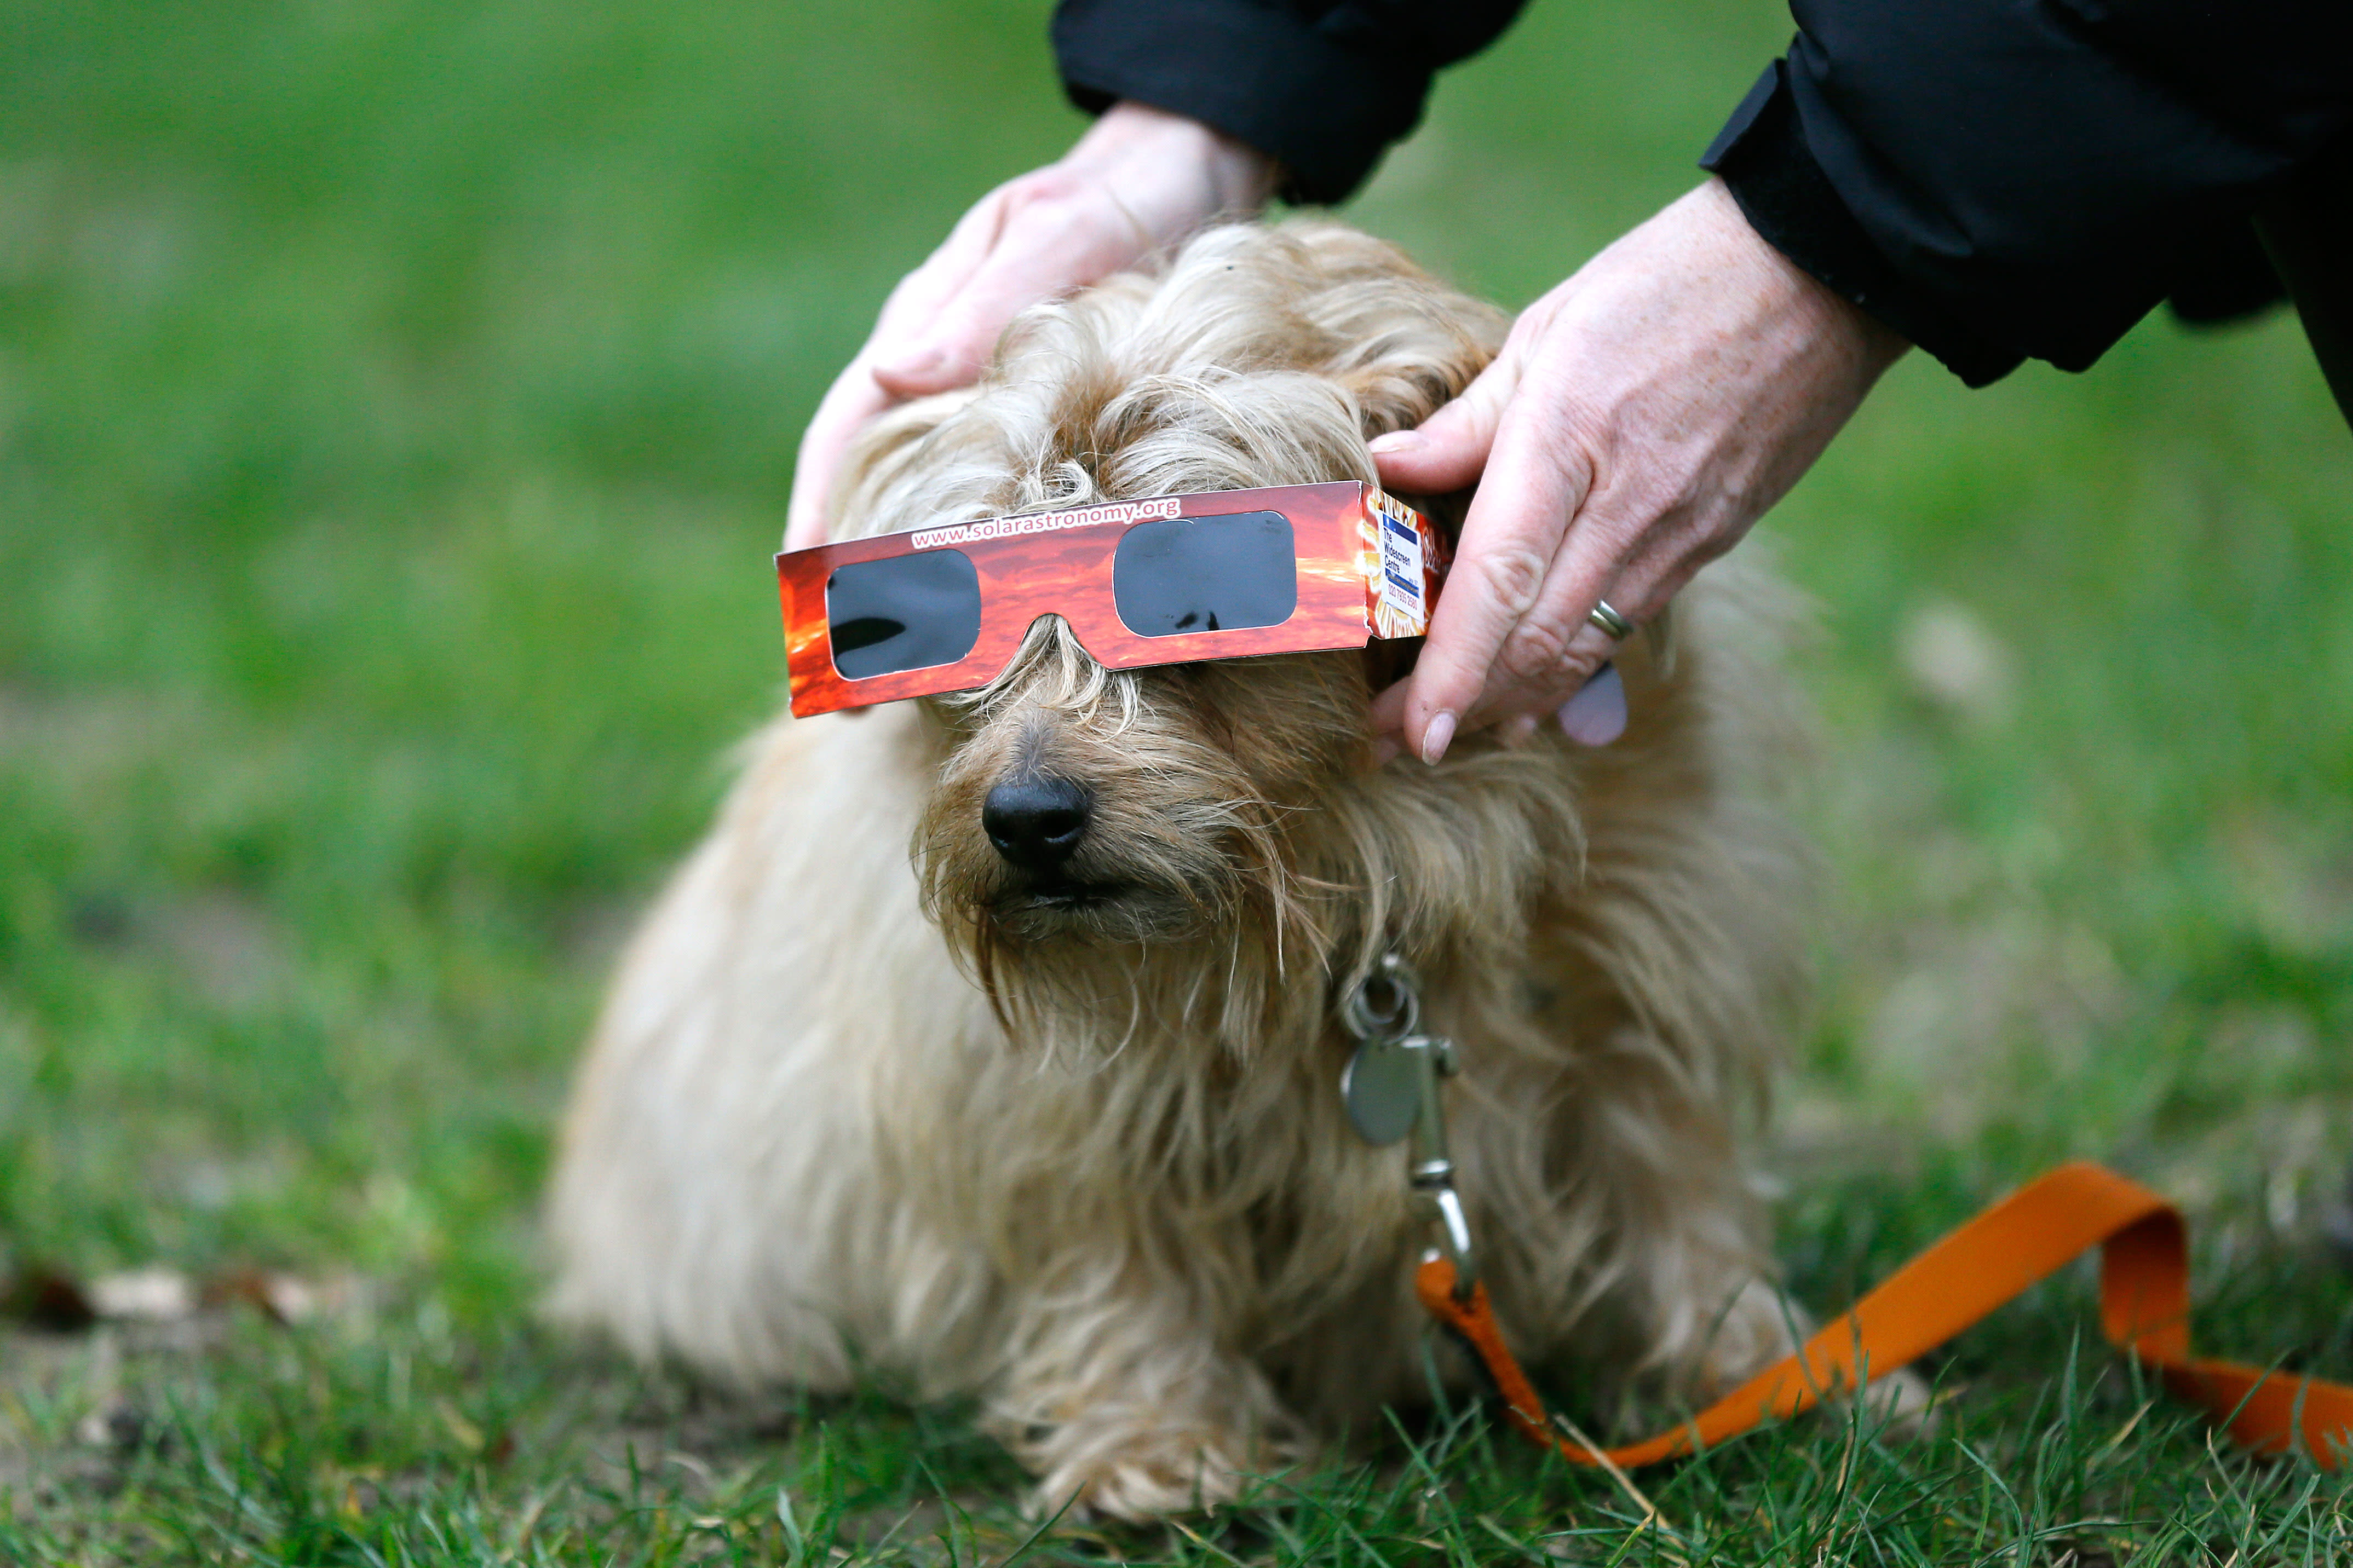 The Total Solar Eclipse Is Almost Over, But These Adorable Photos of